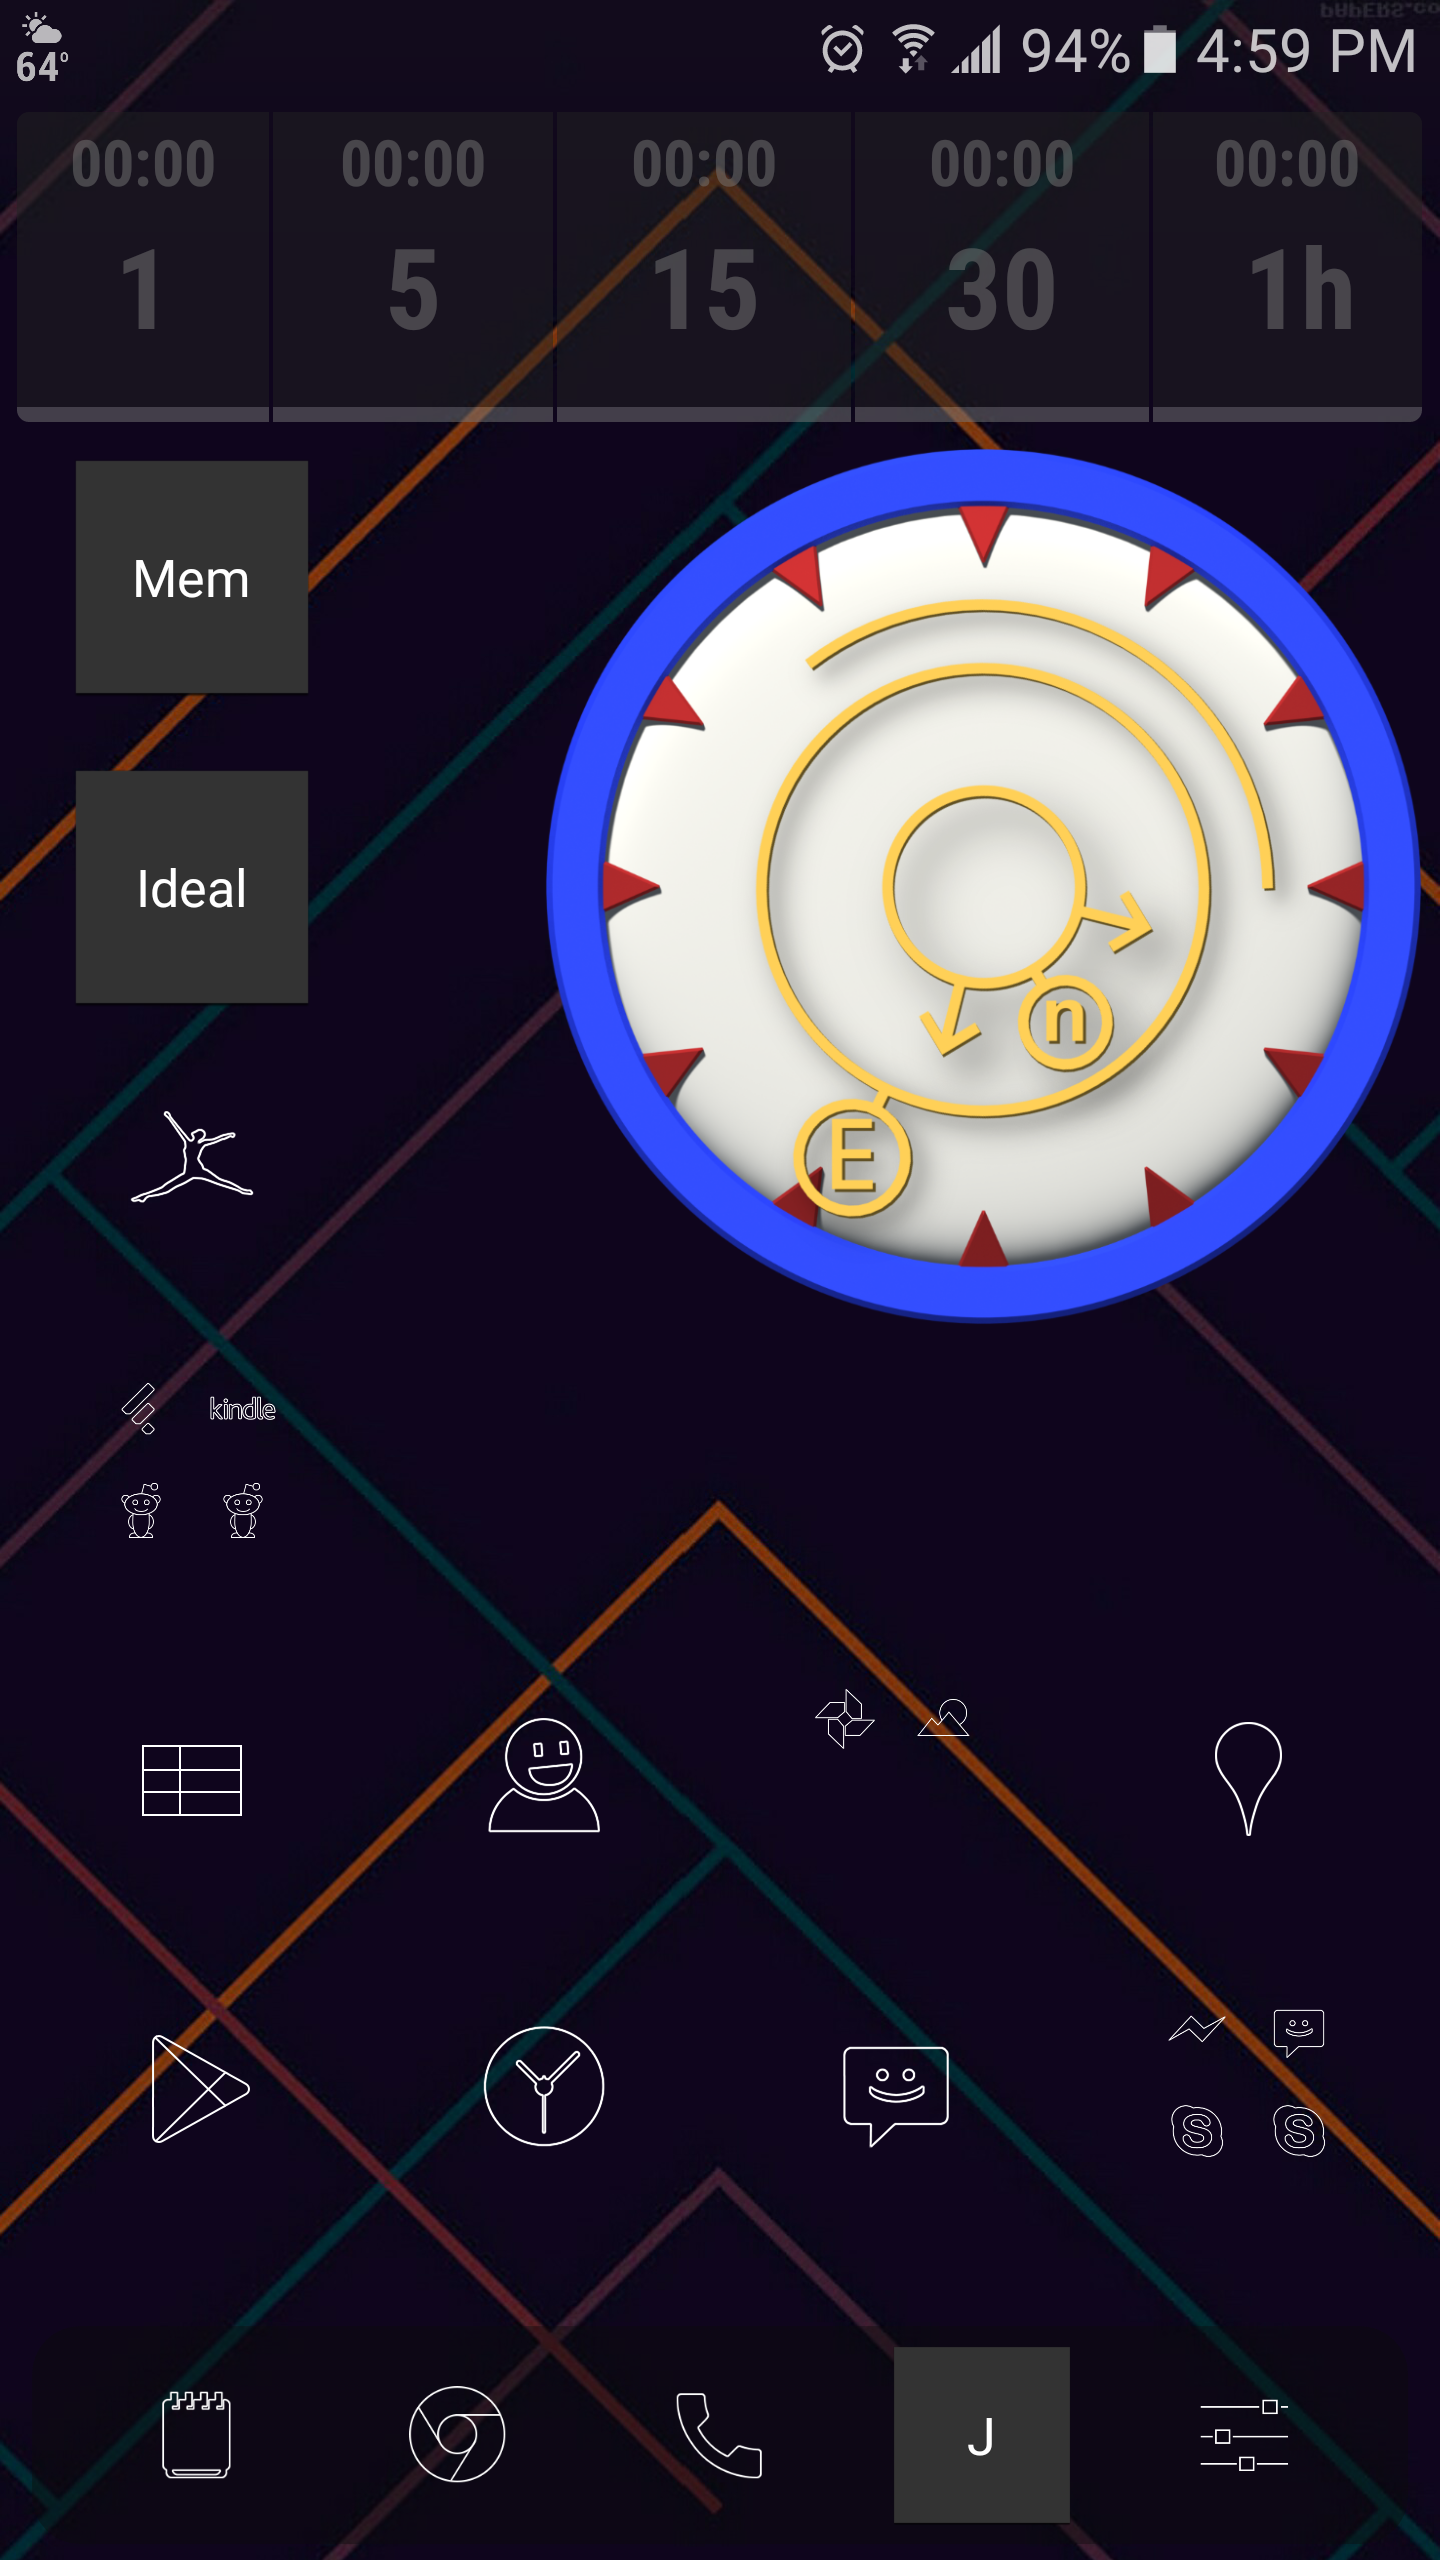 The clock image displayed on an Android home screen.